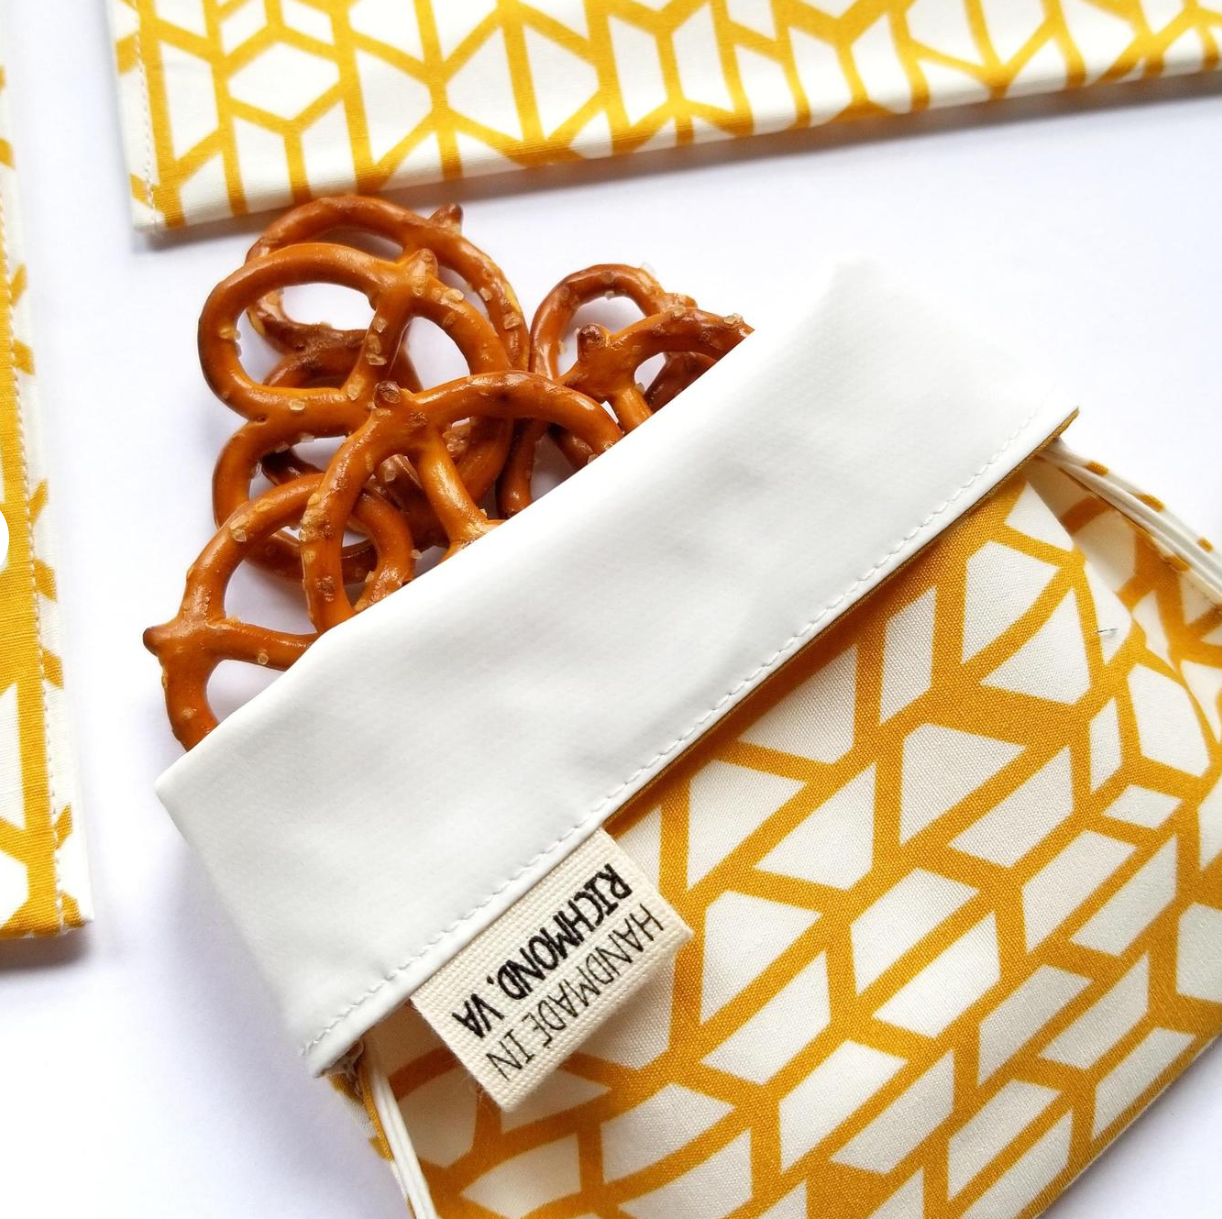 Bees Wrap: Reusable Snack and Sandwich Bags – RedEye Coffee